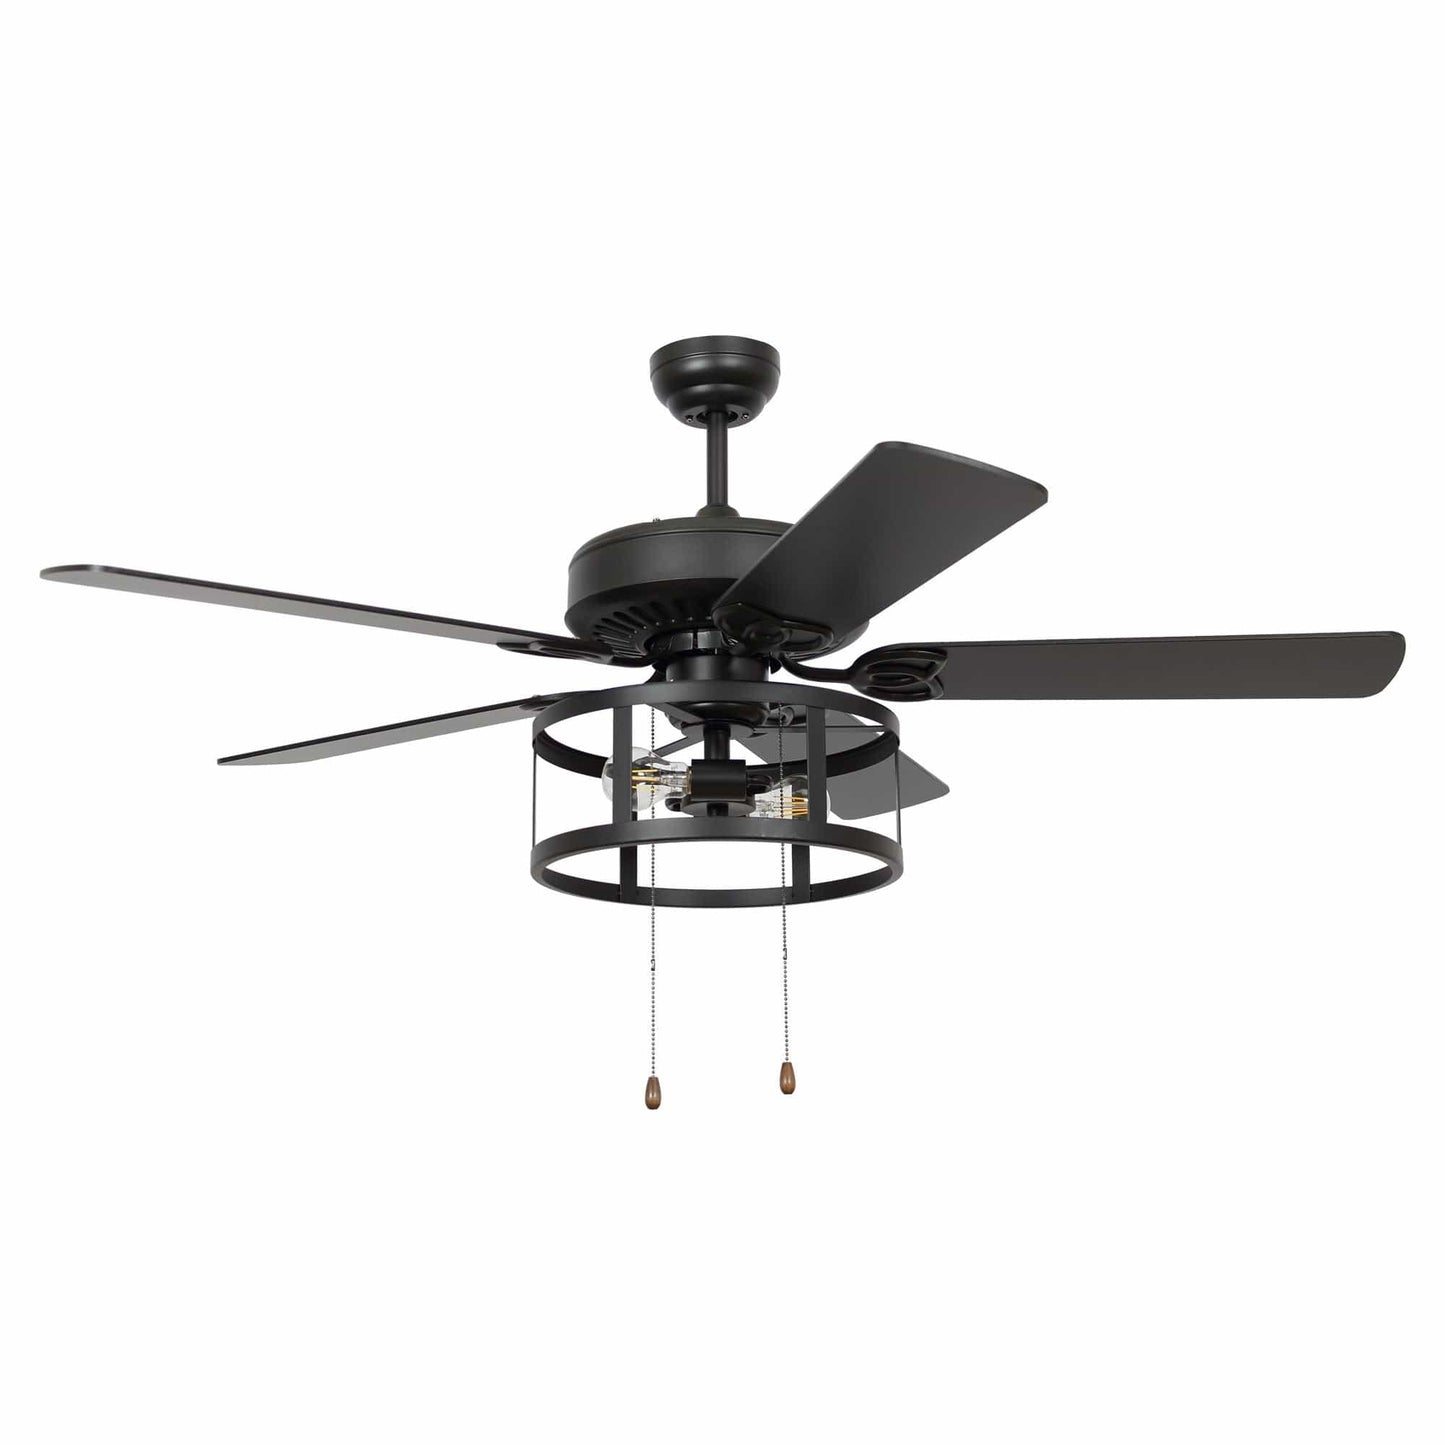 Parrot Uncle 52" Urbana Downrod Mount Reversible Industrial Ceiling Fan with Lighting and Pull Chain